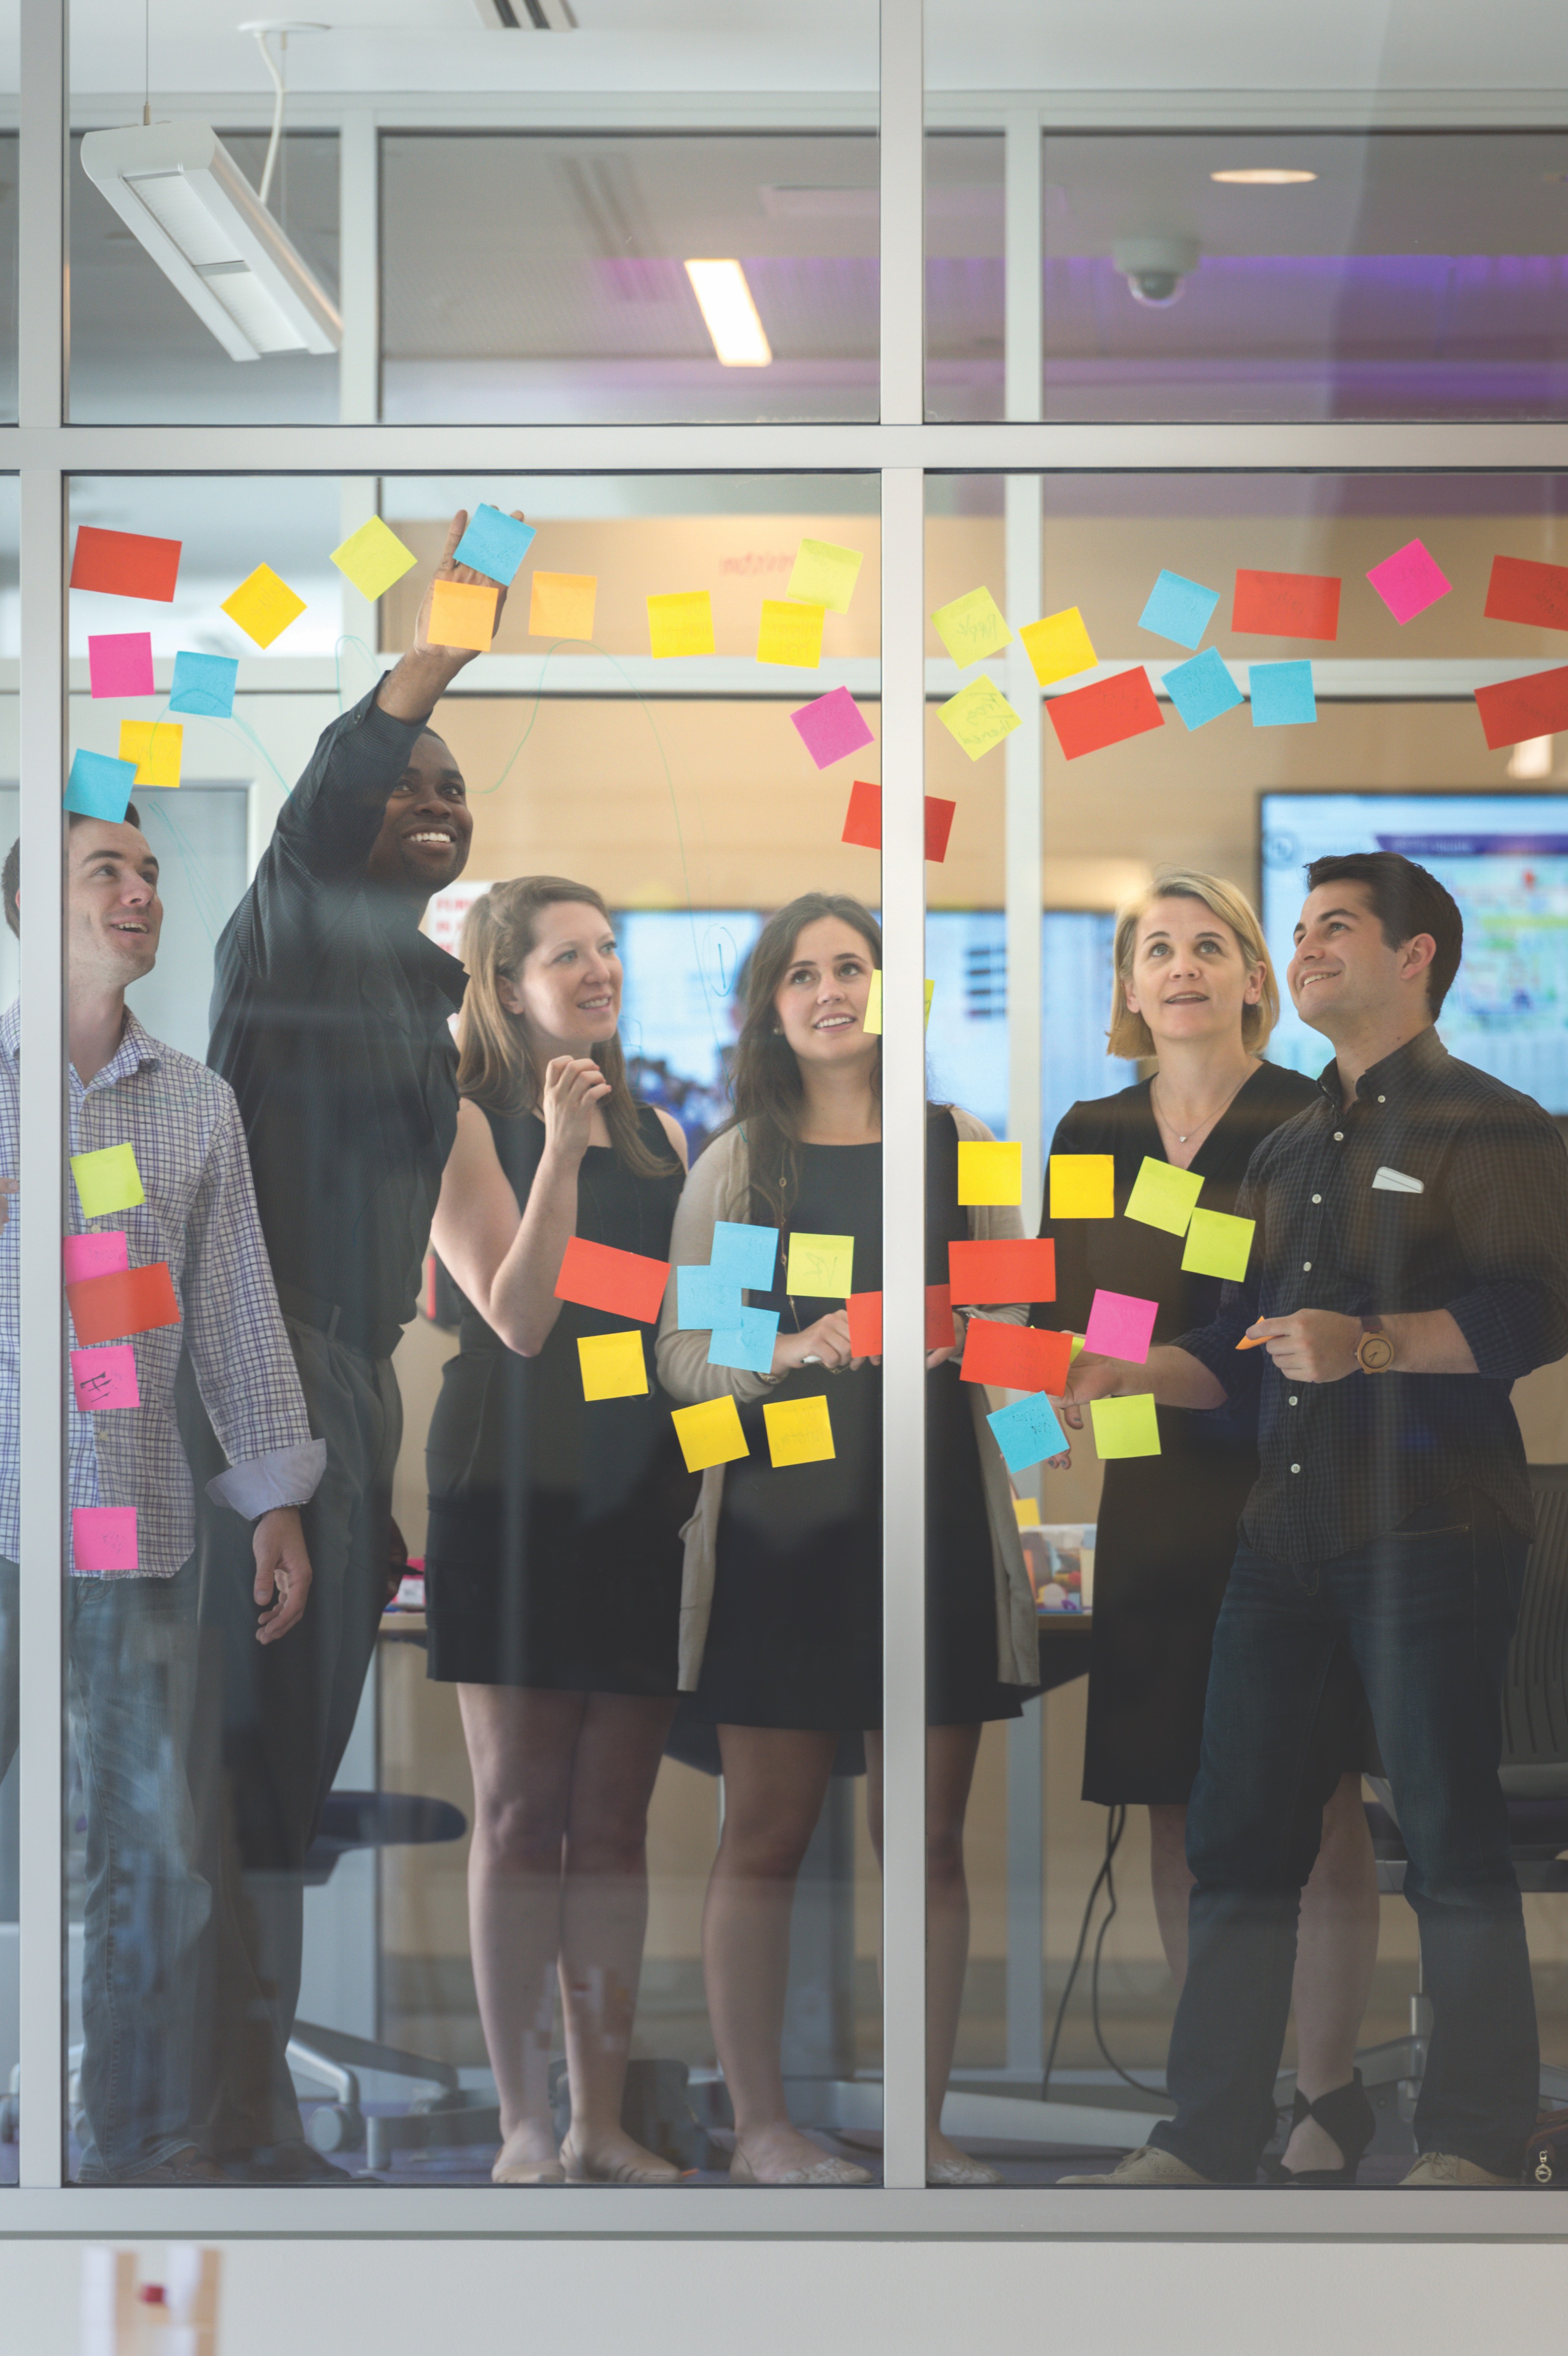 Students use Post-It notes to brainstorm ideas. Photo by Leo Wesson, April 27, 2016